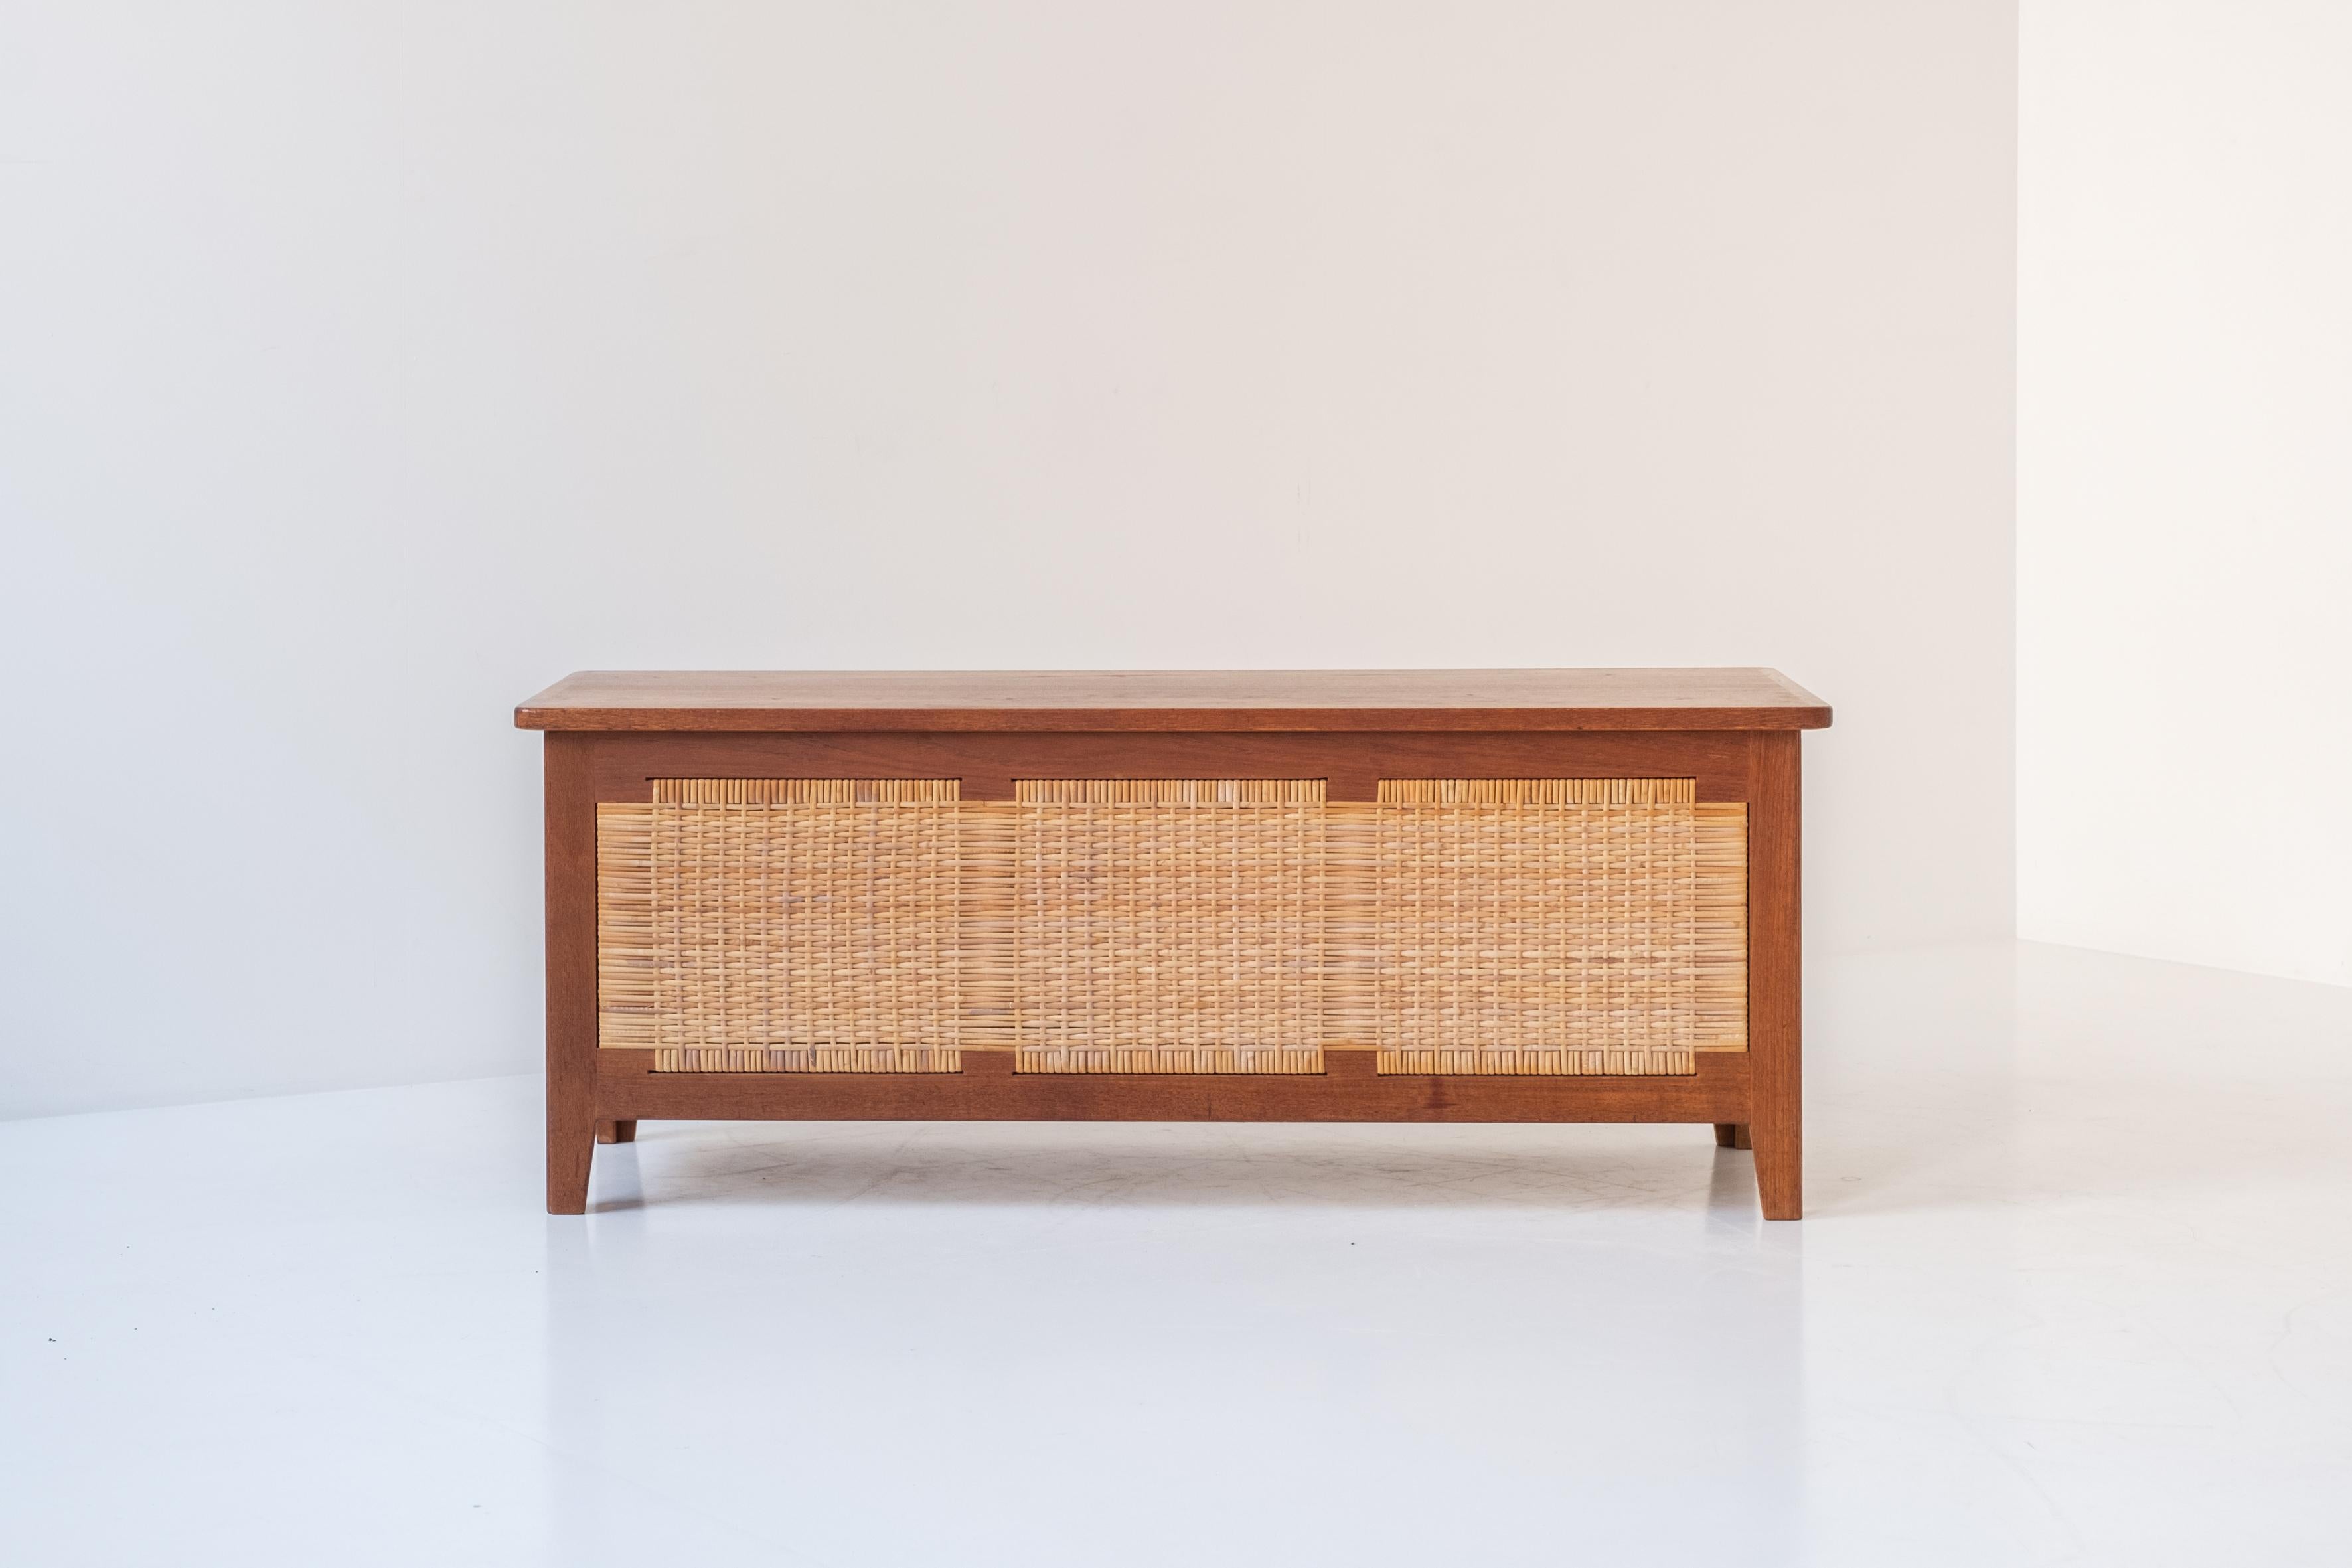 Rare chest in teak by Kai Winding for Poul Hundevad, Denmark 1960’s. This (blanket) chest is made out of woven cane and has a hinged top opening to storage. Presented in a very good original condition.